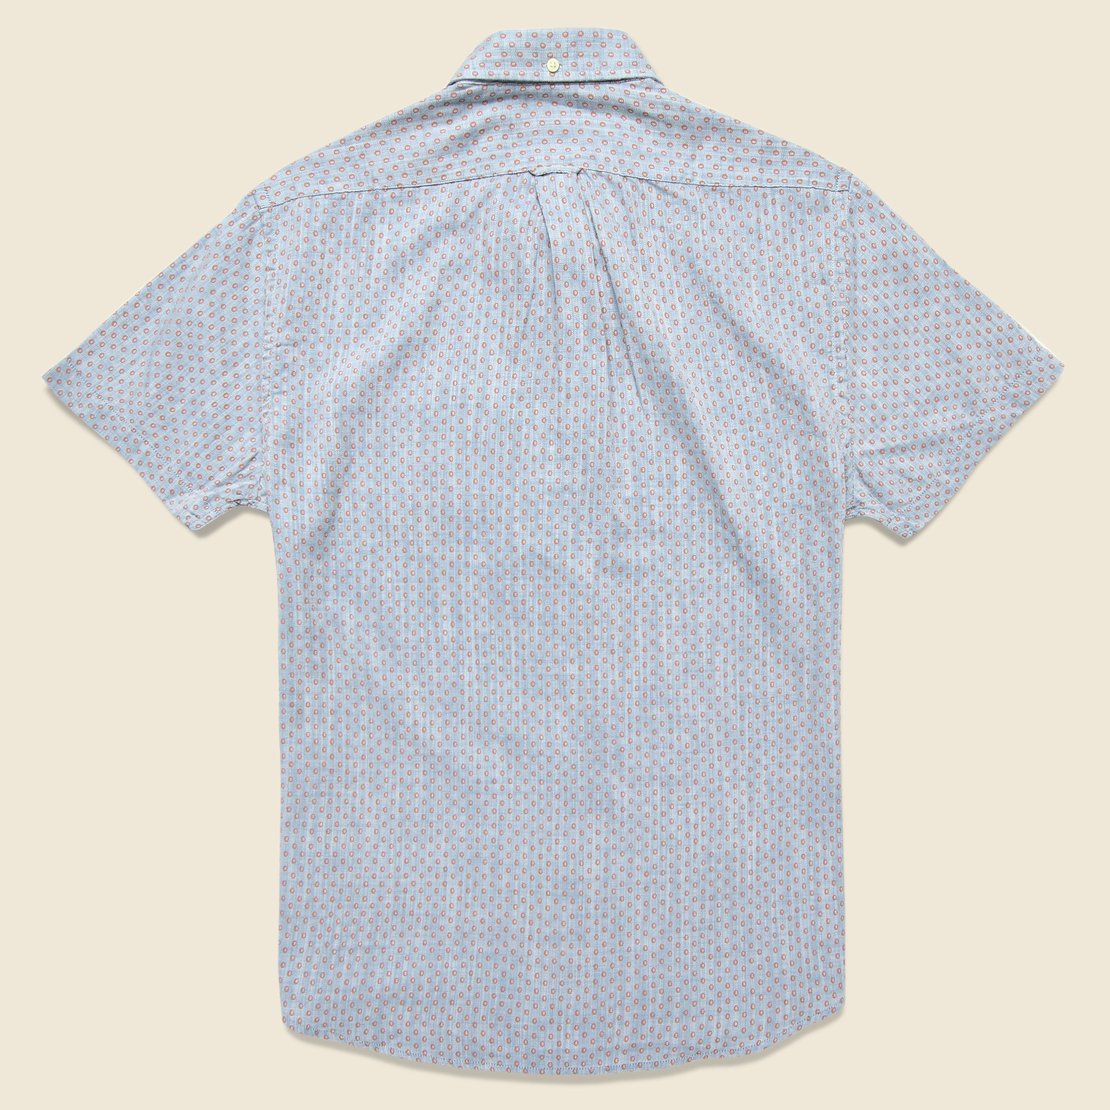 Ahab Open Dot Print Shirt - Blue - Grayers - STAG Provisions - Tops - S/S Woven - Other Pattern